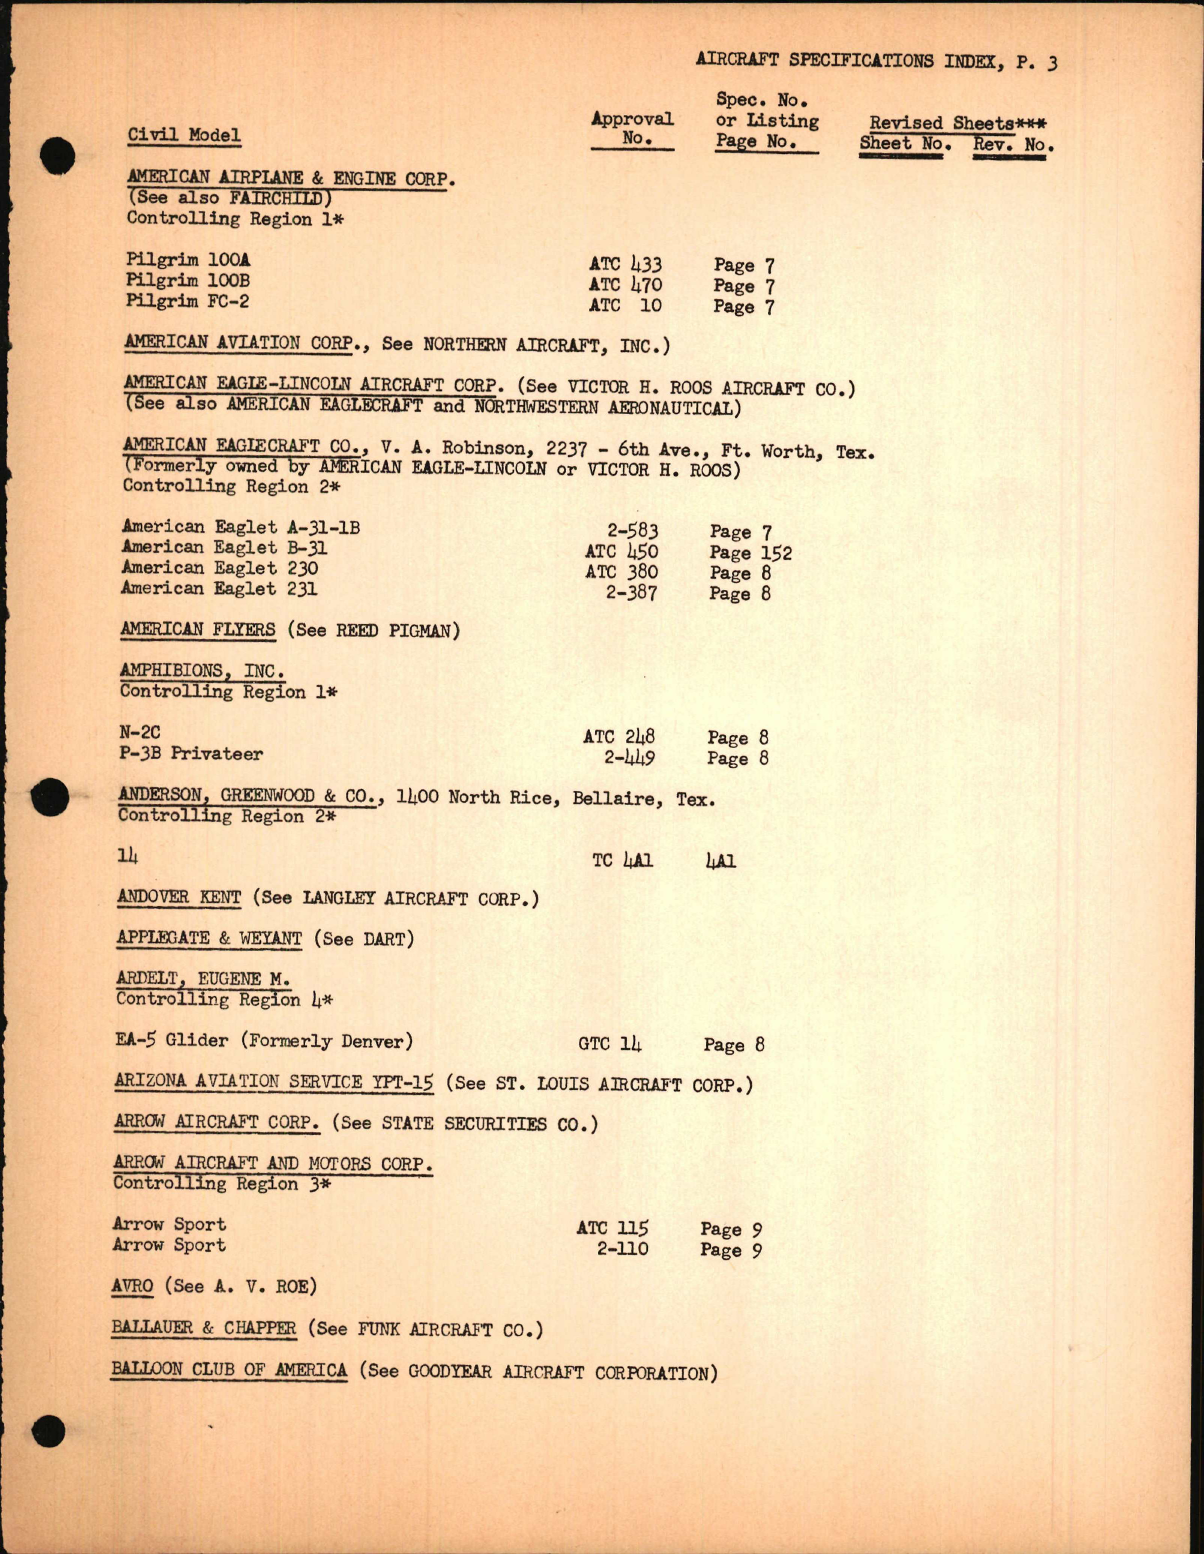 Sample page 5 from AirCorps Library document: Aircraft Specifications